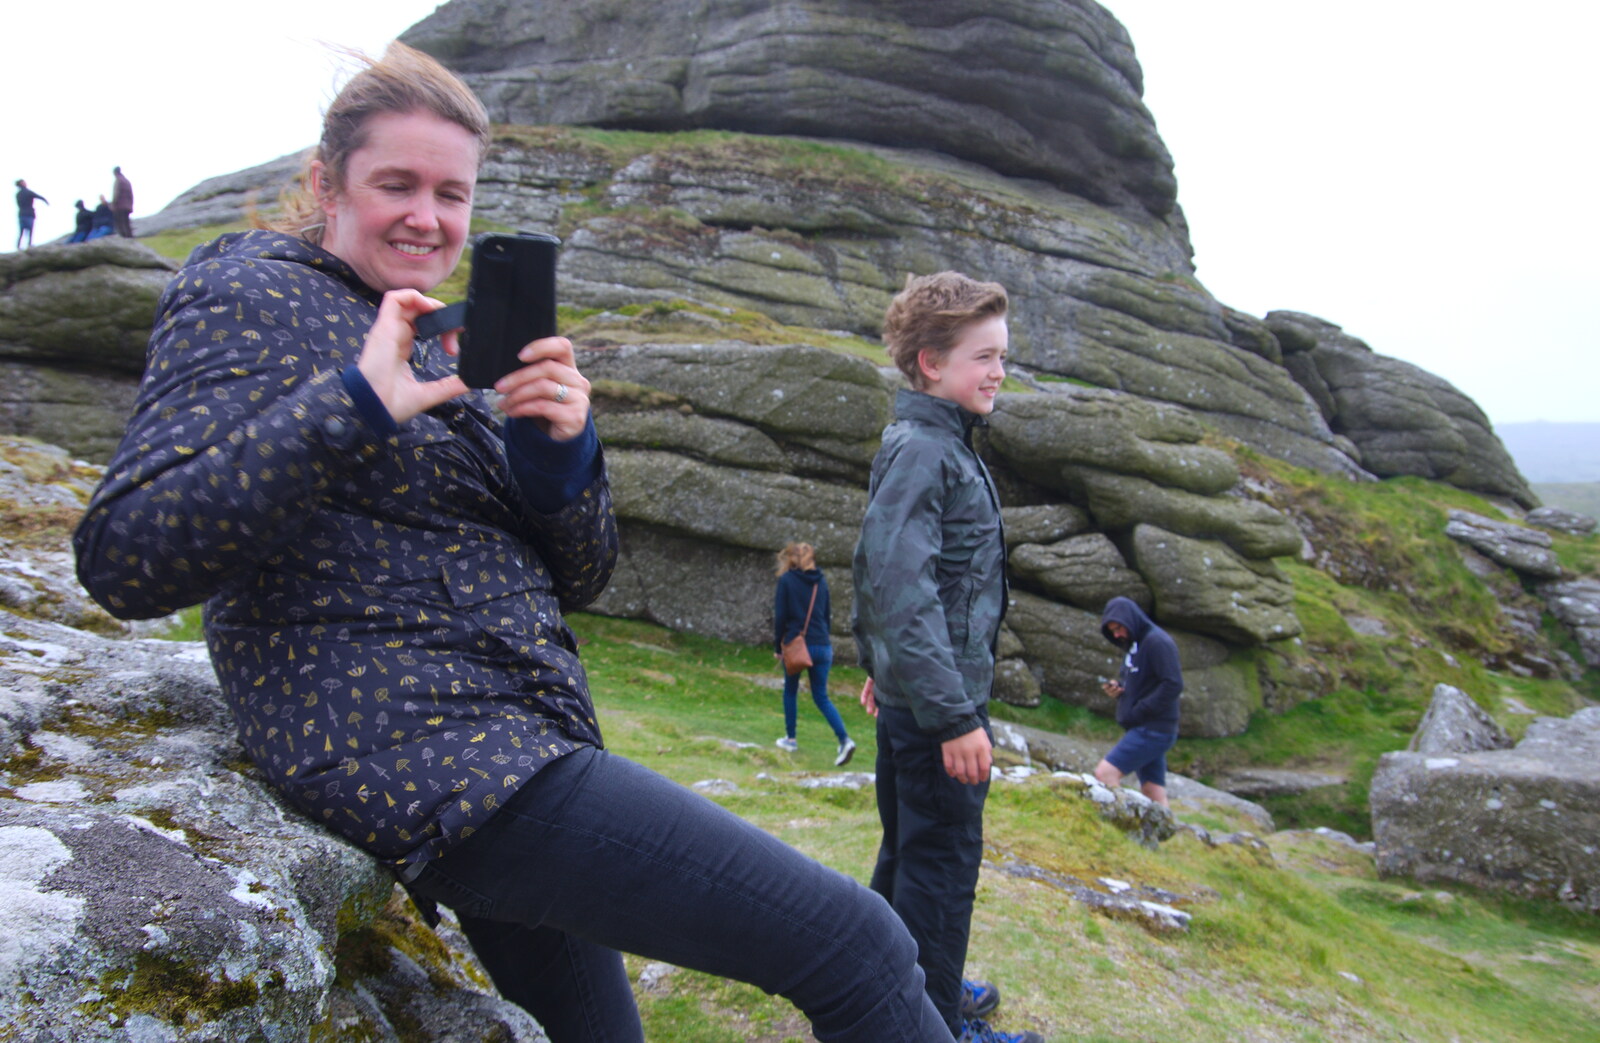 Isobel takes a photo from The Tom Cobley and a Return to Haytor, Bovey Tracey, Devon - 27th May 2019